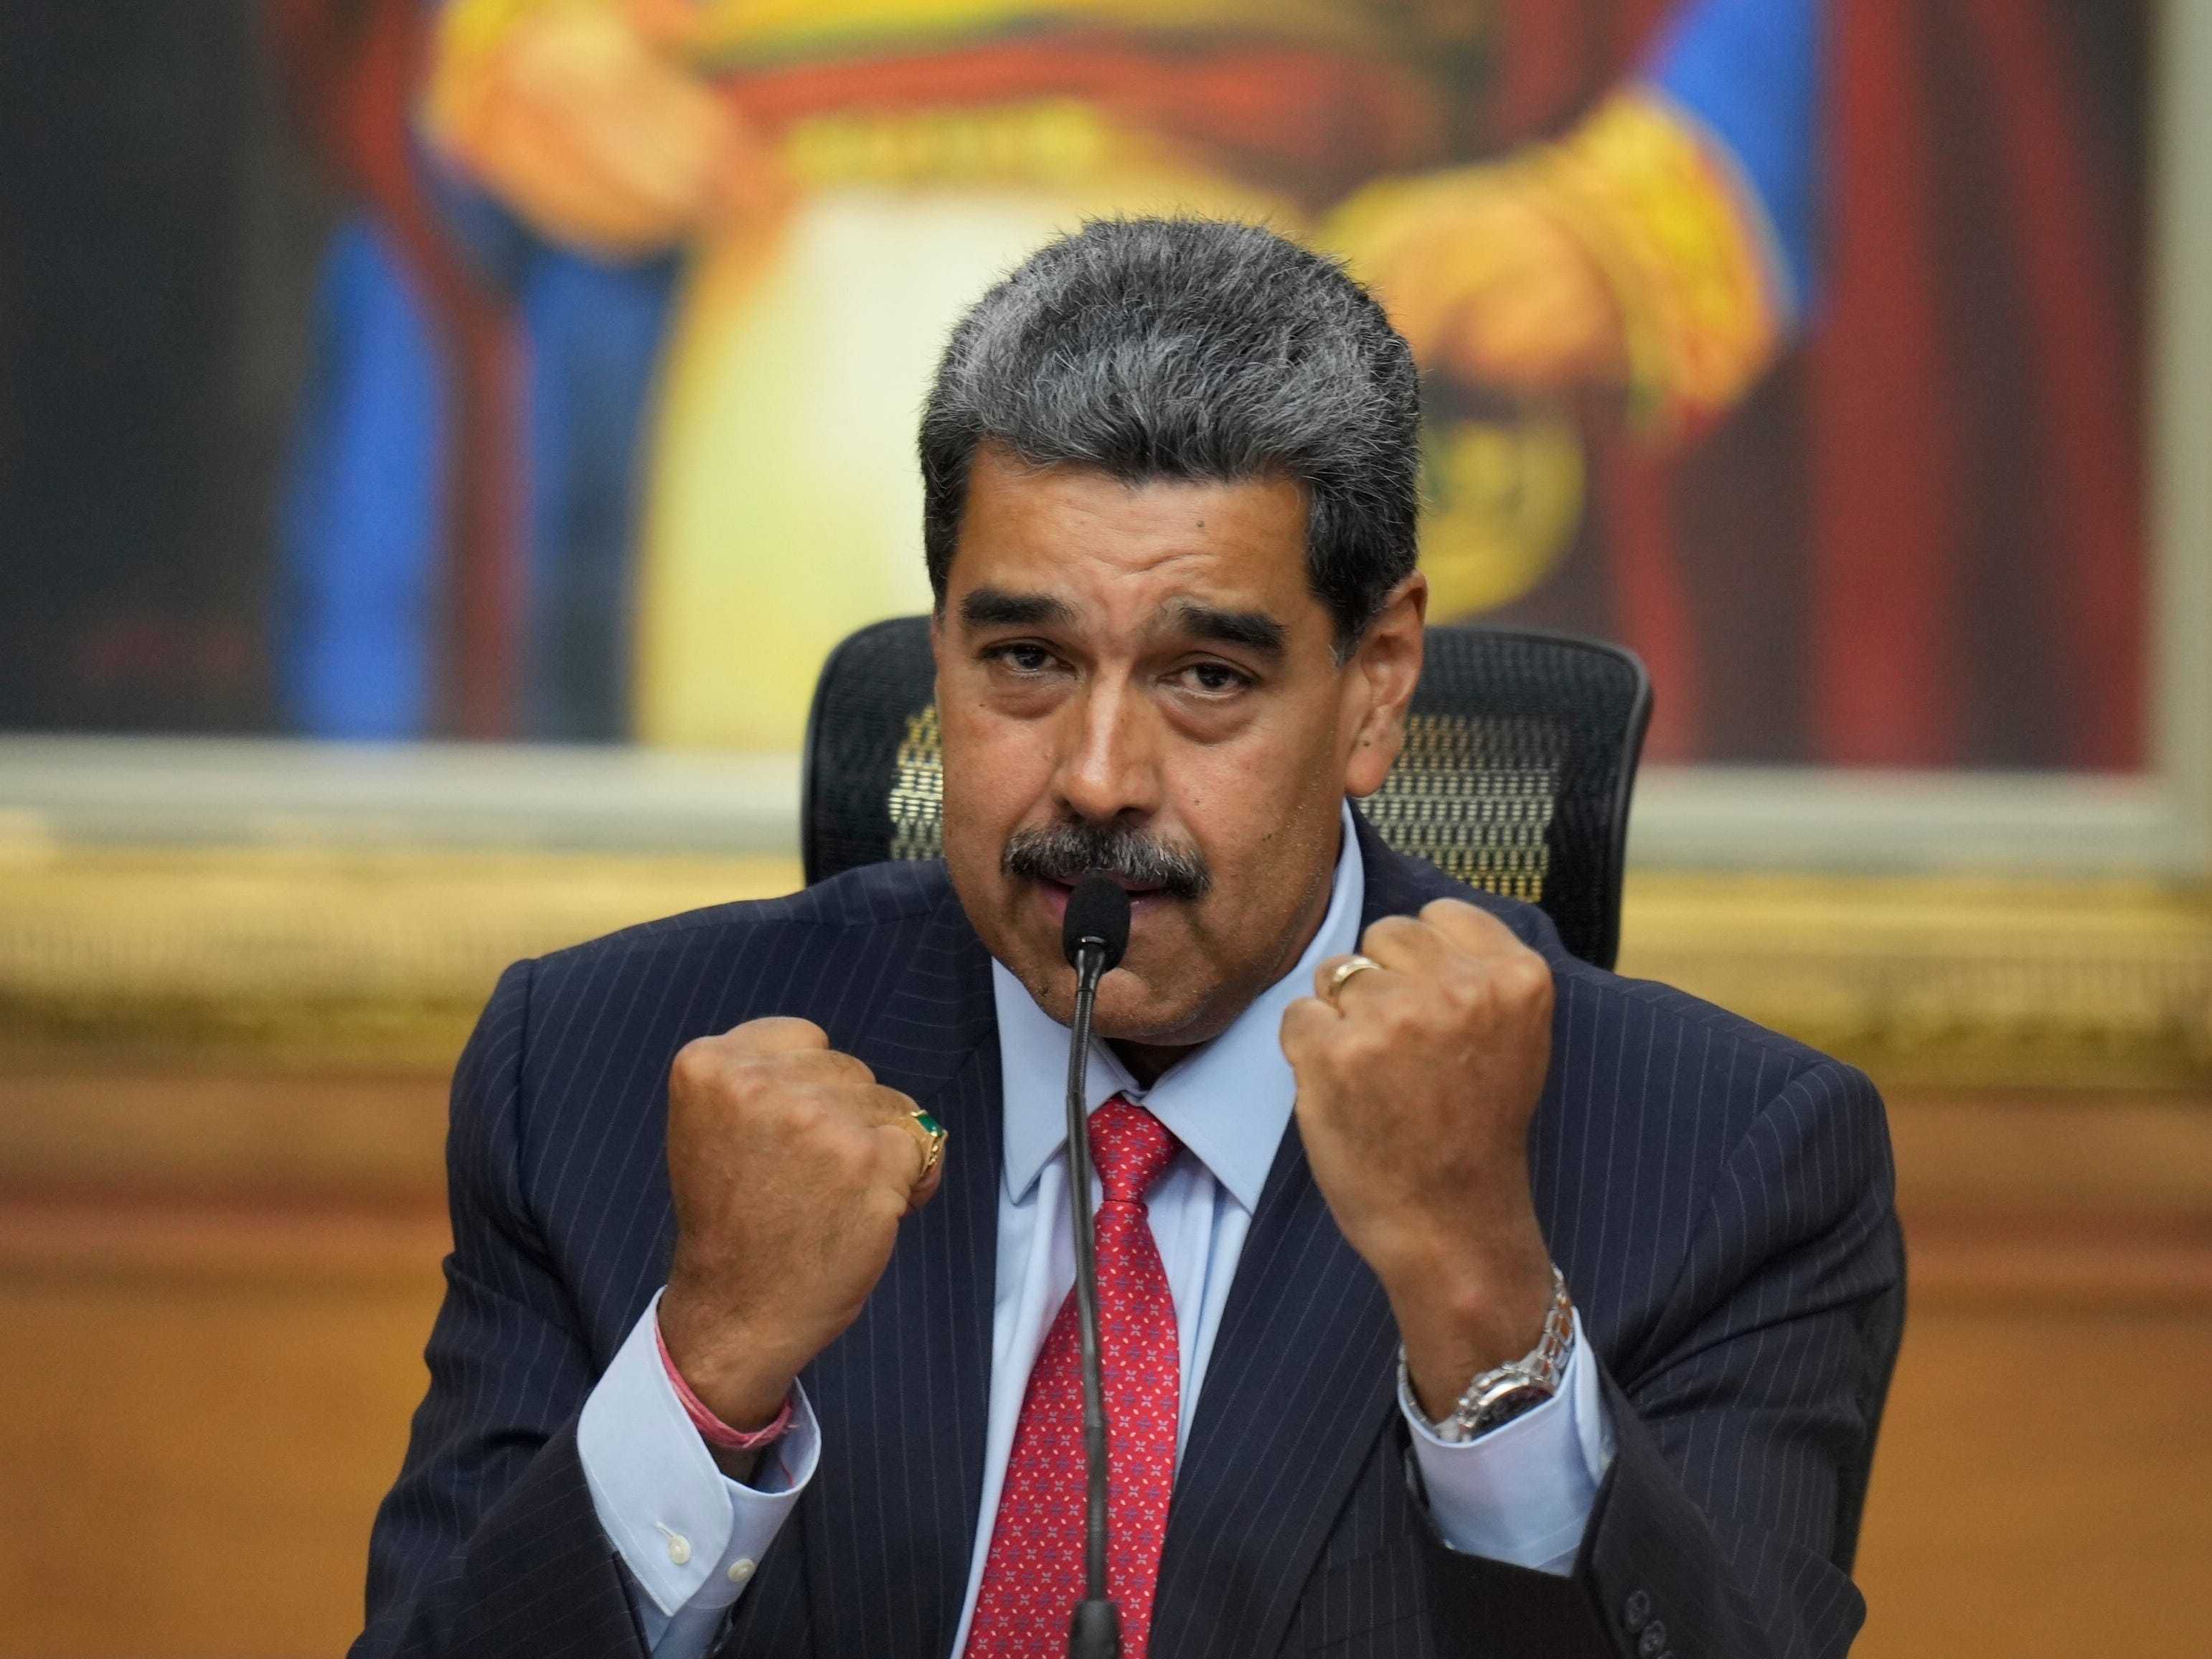 Diplomatic efforts to persuade Maduro to release Venezuela election vote tallies